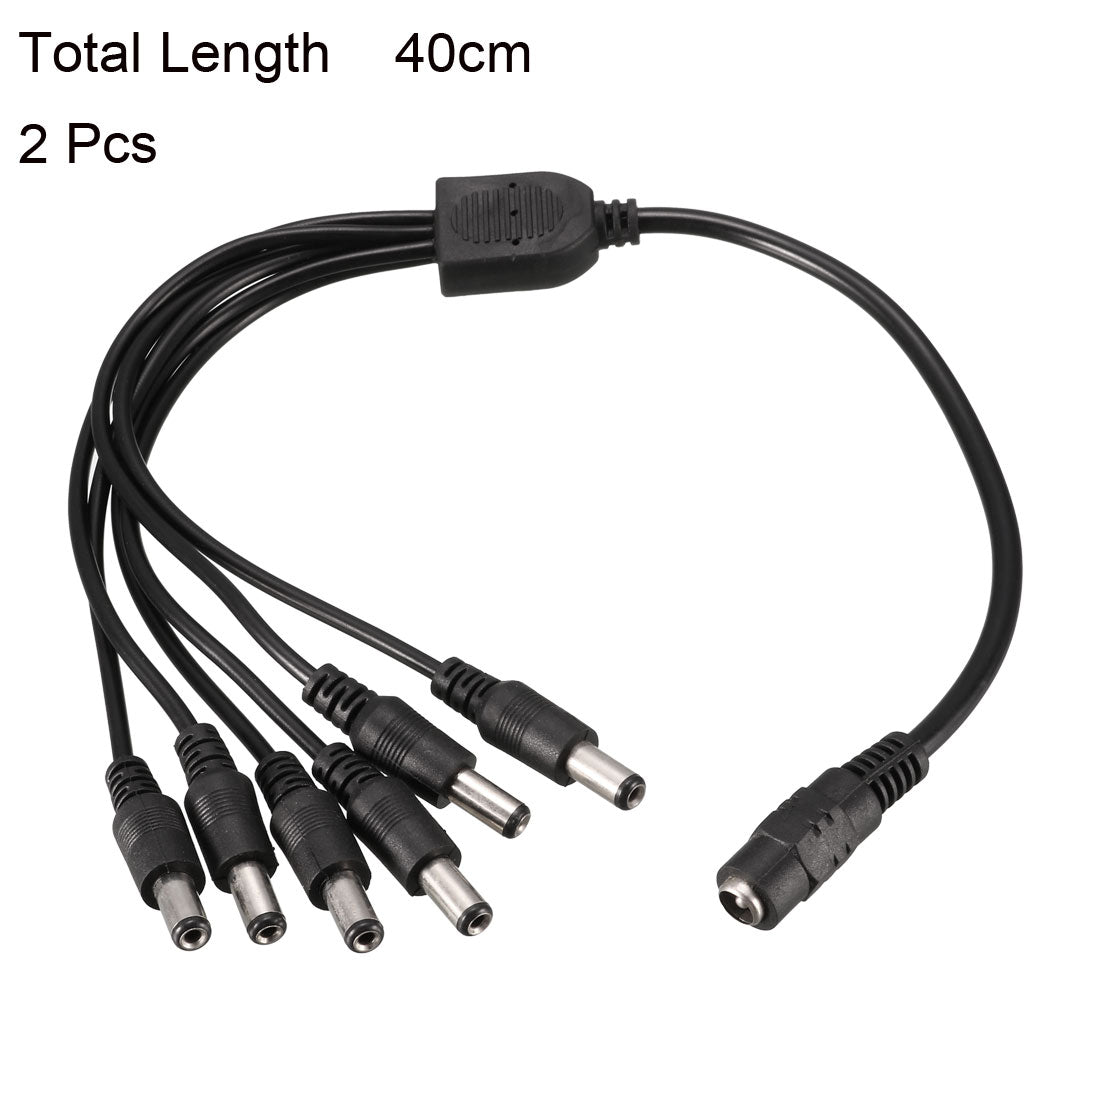 uxcell Uxcell 2Pcs 12V DC Power Splitter Cable 1 Female to 6 Male Connectors 40cm for CCTV Security Camera 2.1mmx5.5mm